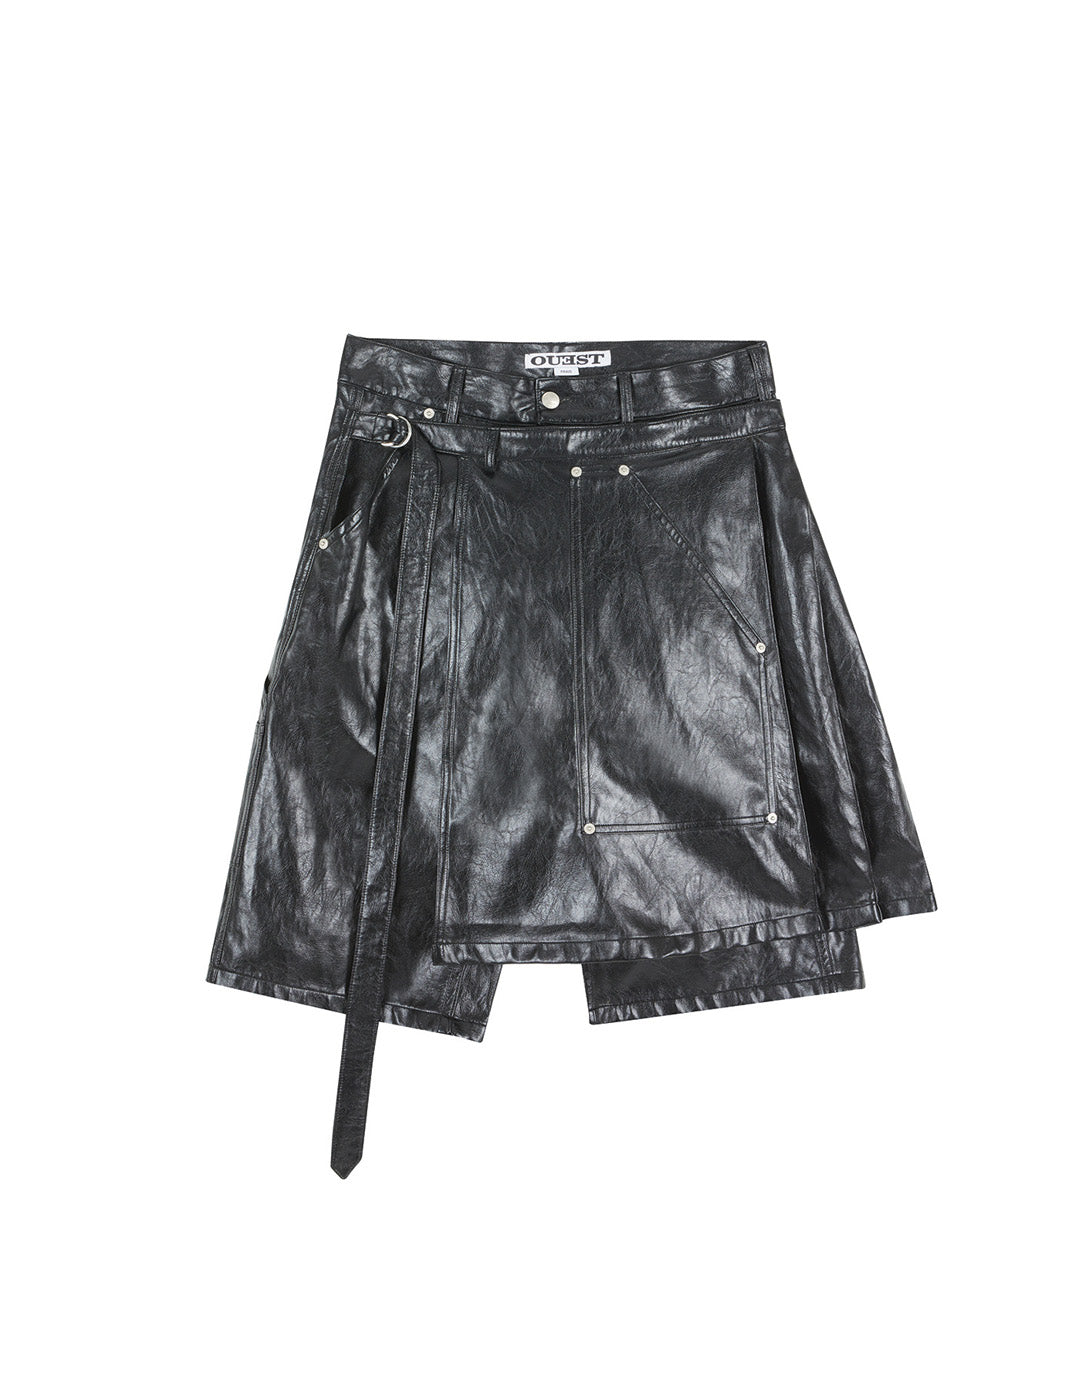 THE APRON SHORTS IN VEGAN LEATHER